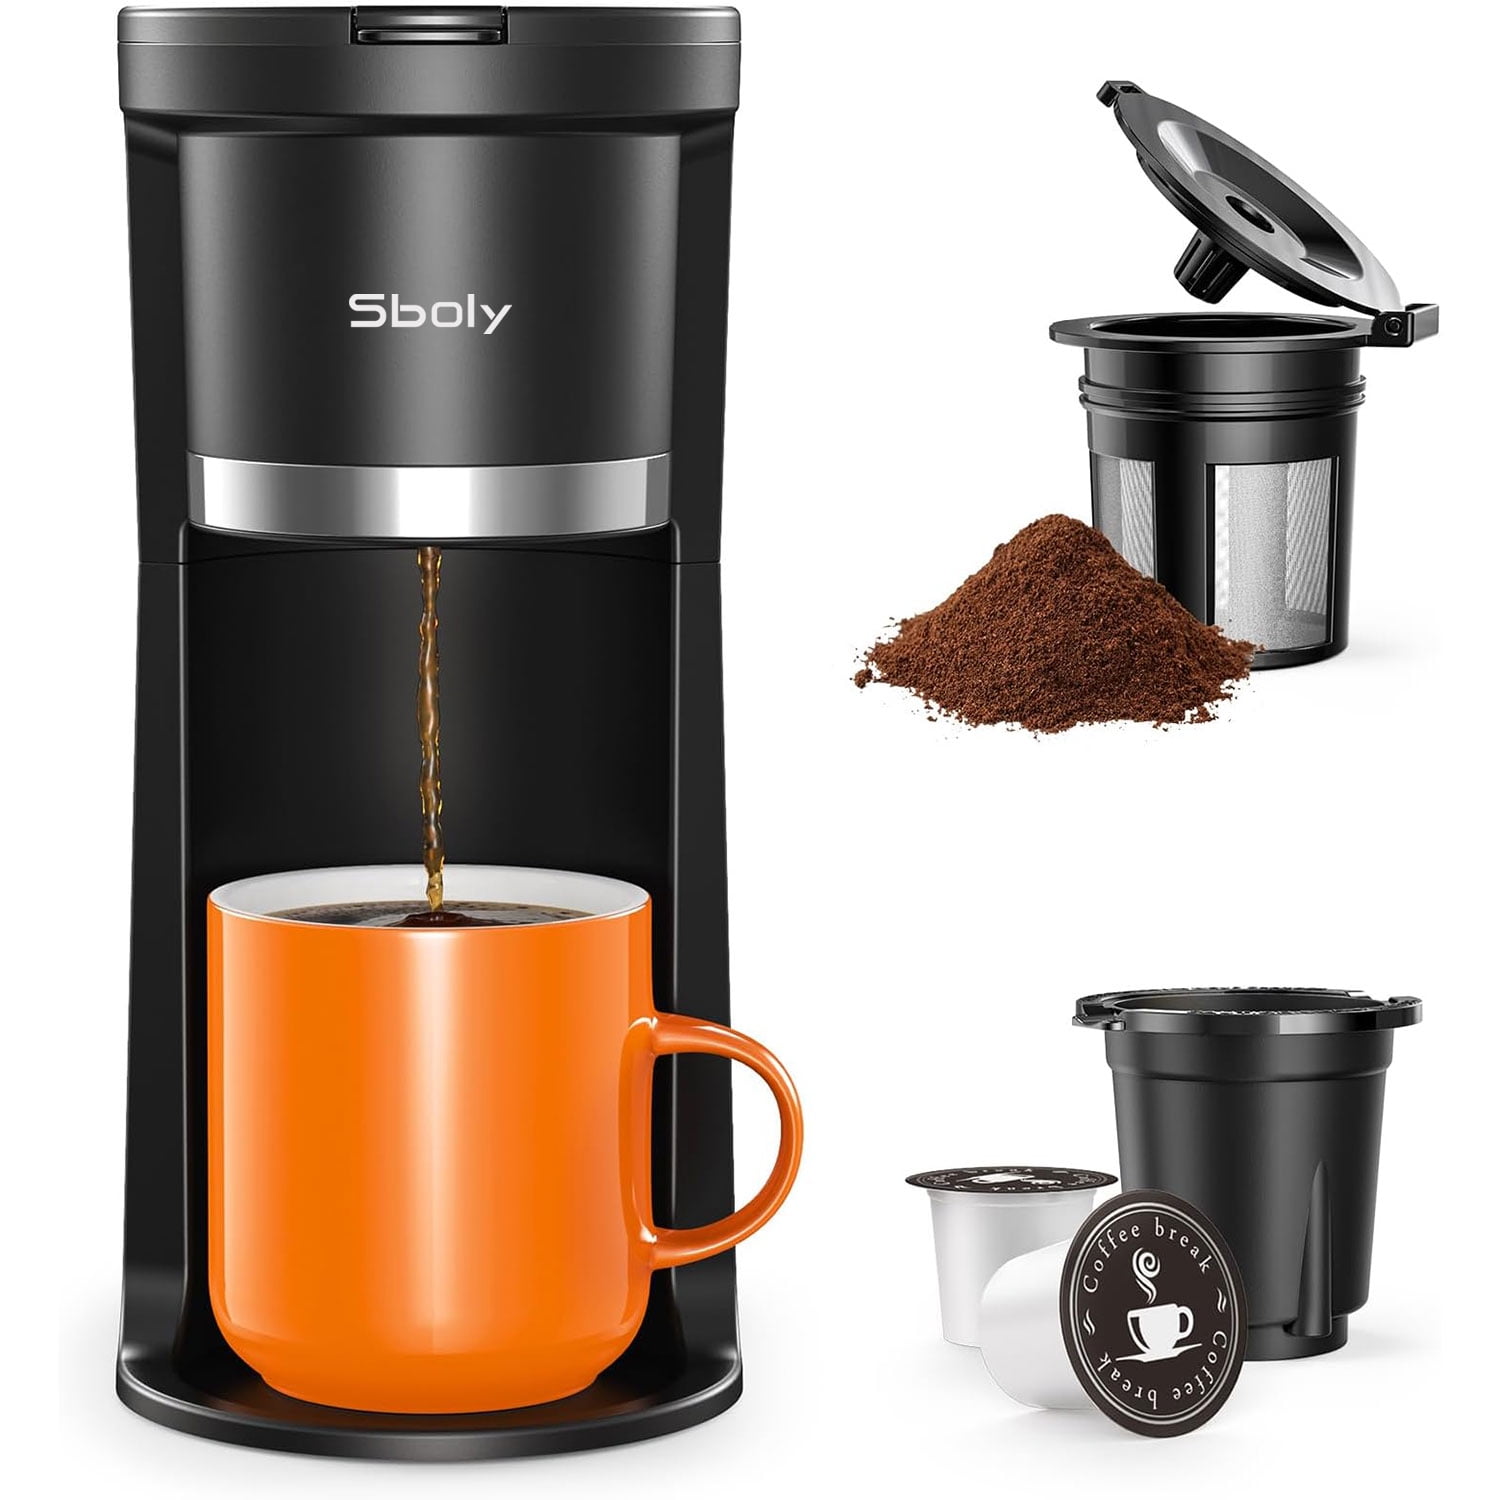 Sboly Single Serve Coffee Maker with Milk Frother , Cappuccino and